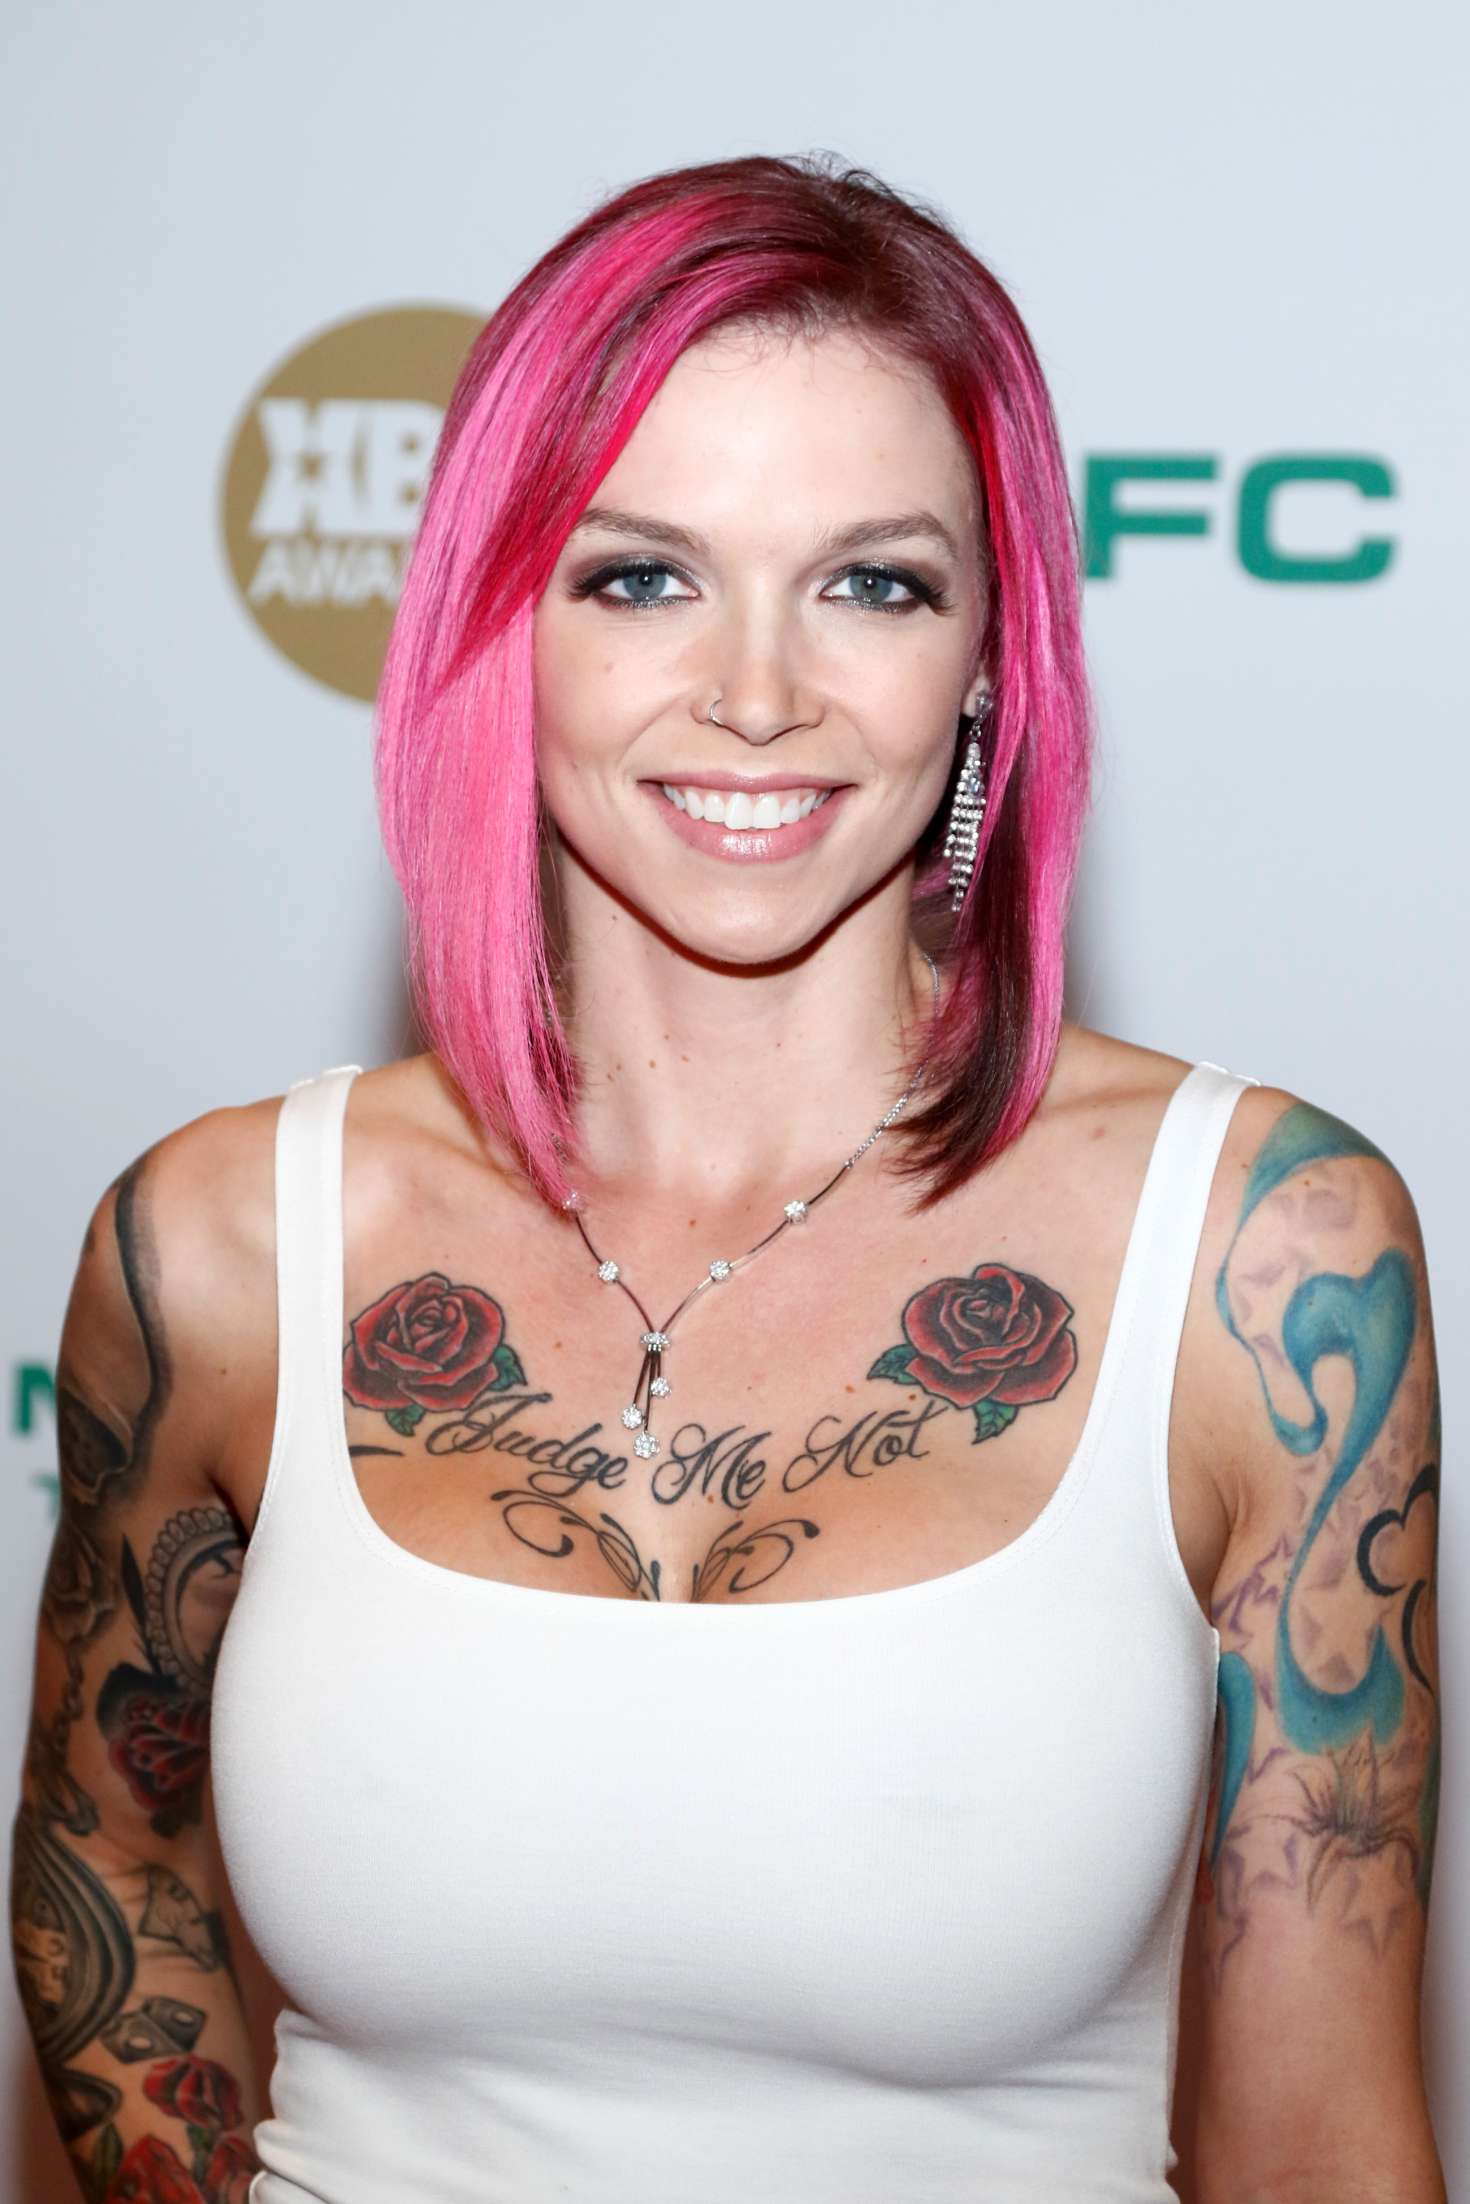 Anna Bell Peaks Wallpapers - Wallpaper Cave.